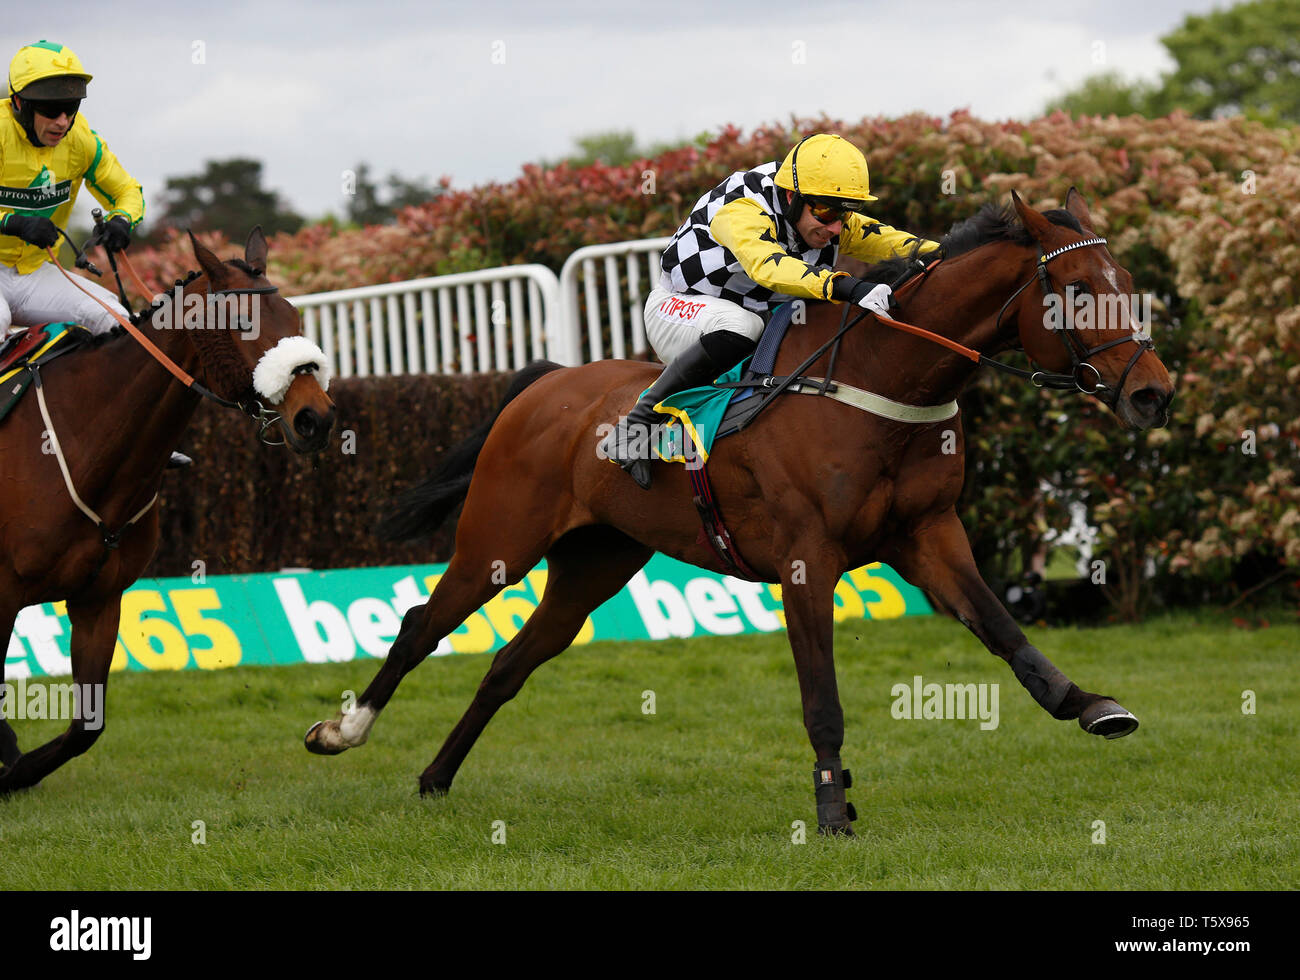 Wayne Hutchinson and Talkischeap (right) lead Mr Sam Waley-Cohen and The Young Master over the last fence before going on to win The bet365 Gold Cup Steeple Chase Race run at Sandown Park Racecourse, Esher. Stock Photo